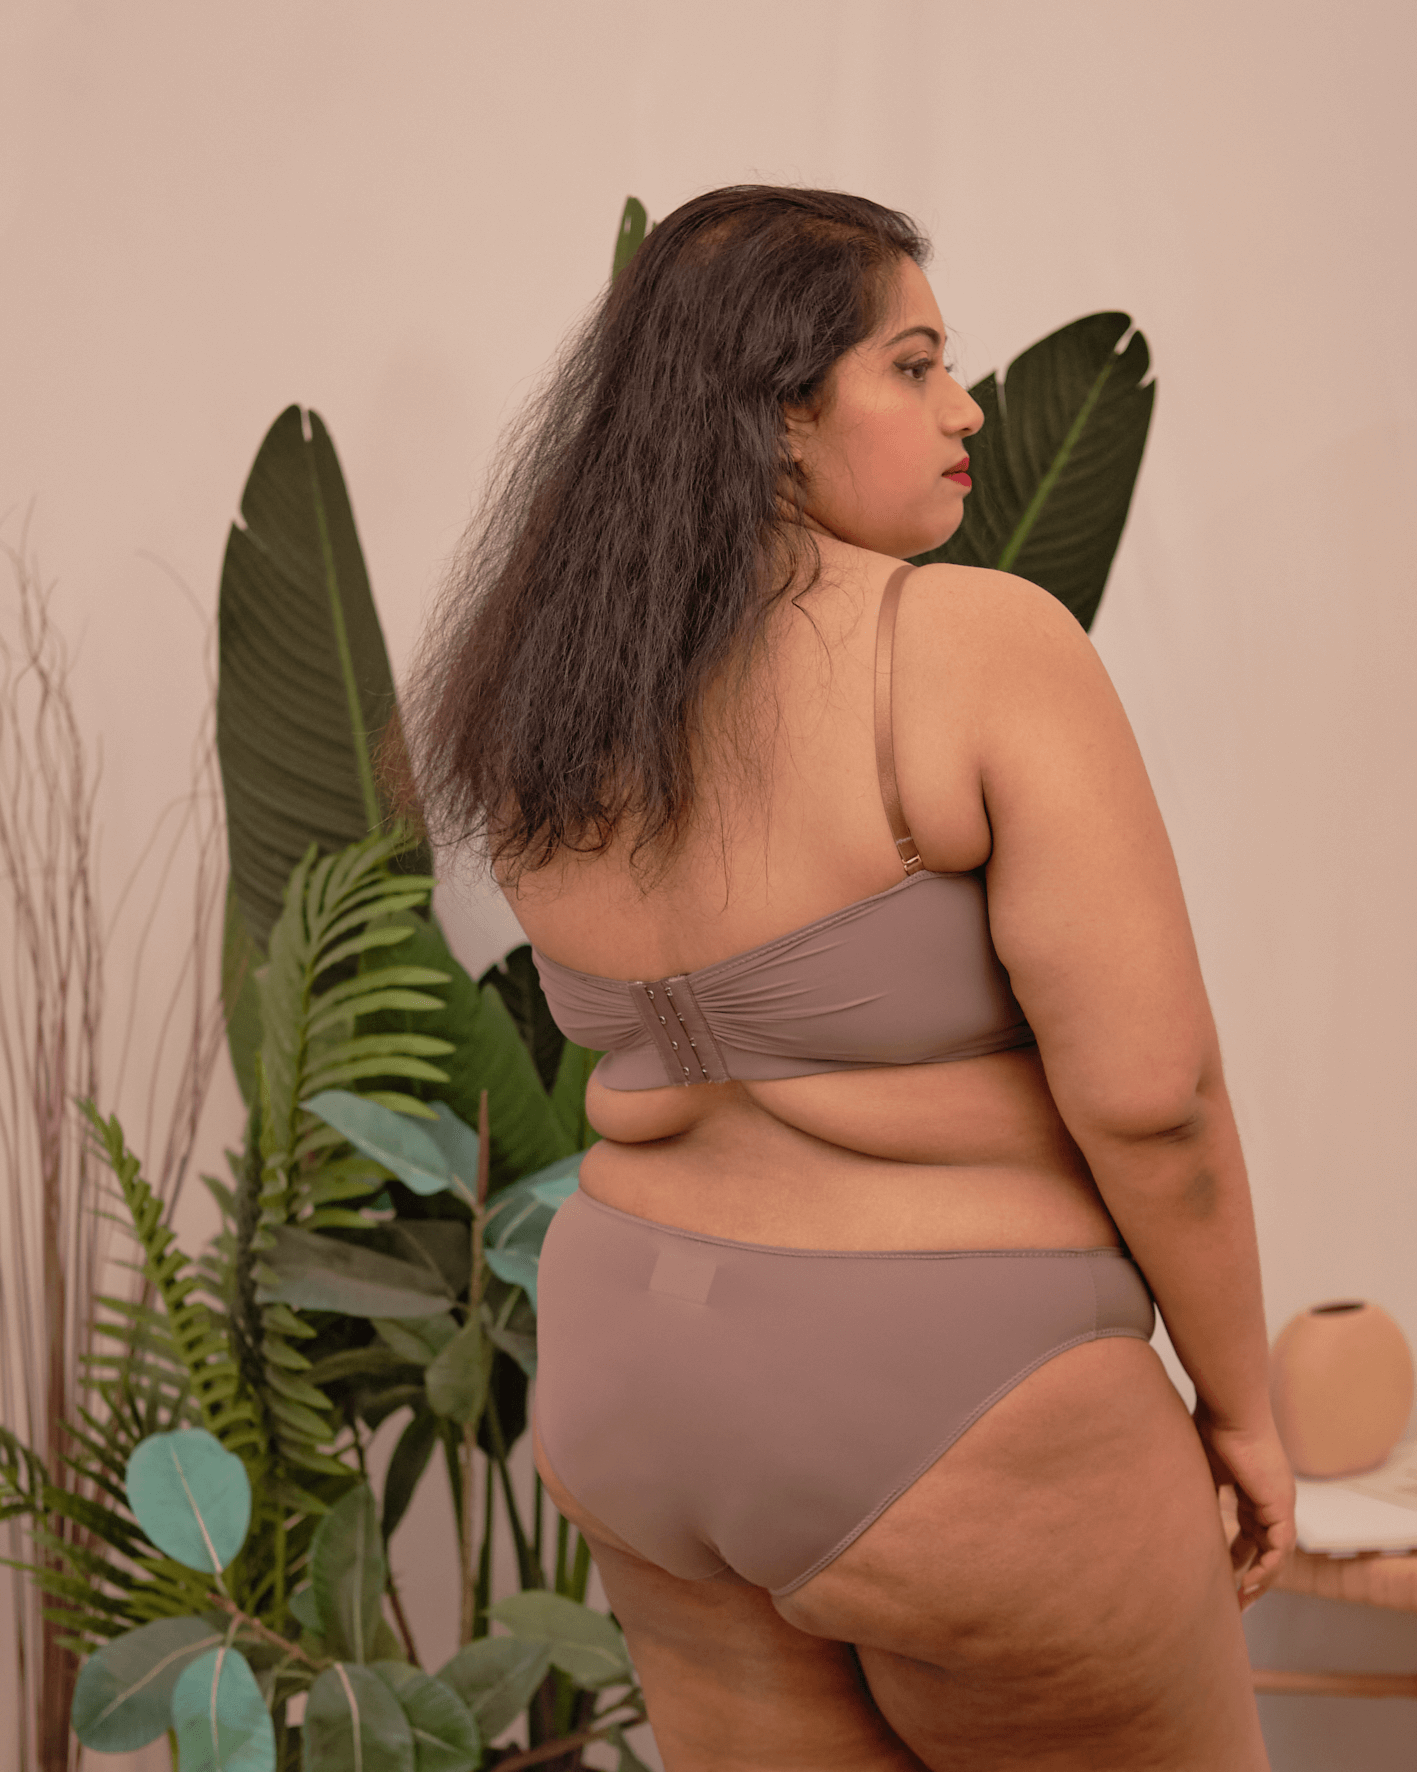 knotty padded strapless bralette in #100 – Our Bralette Club